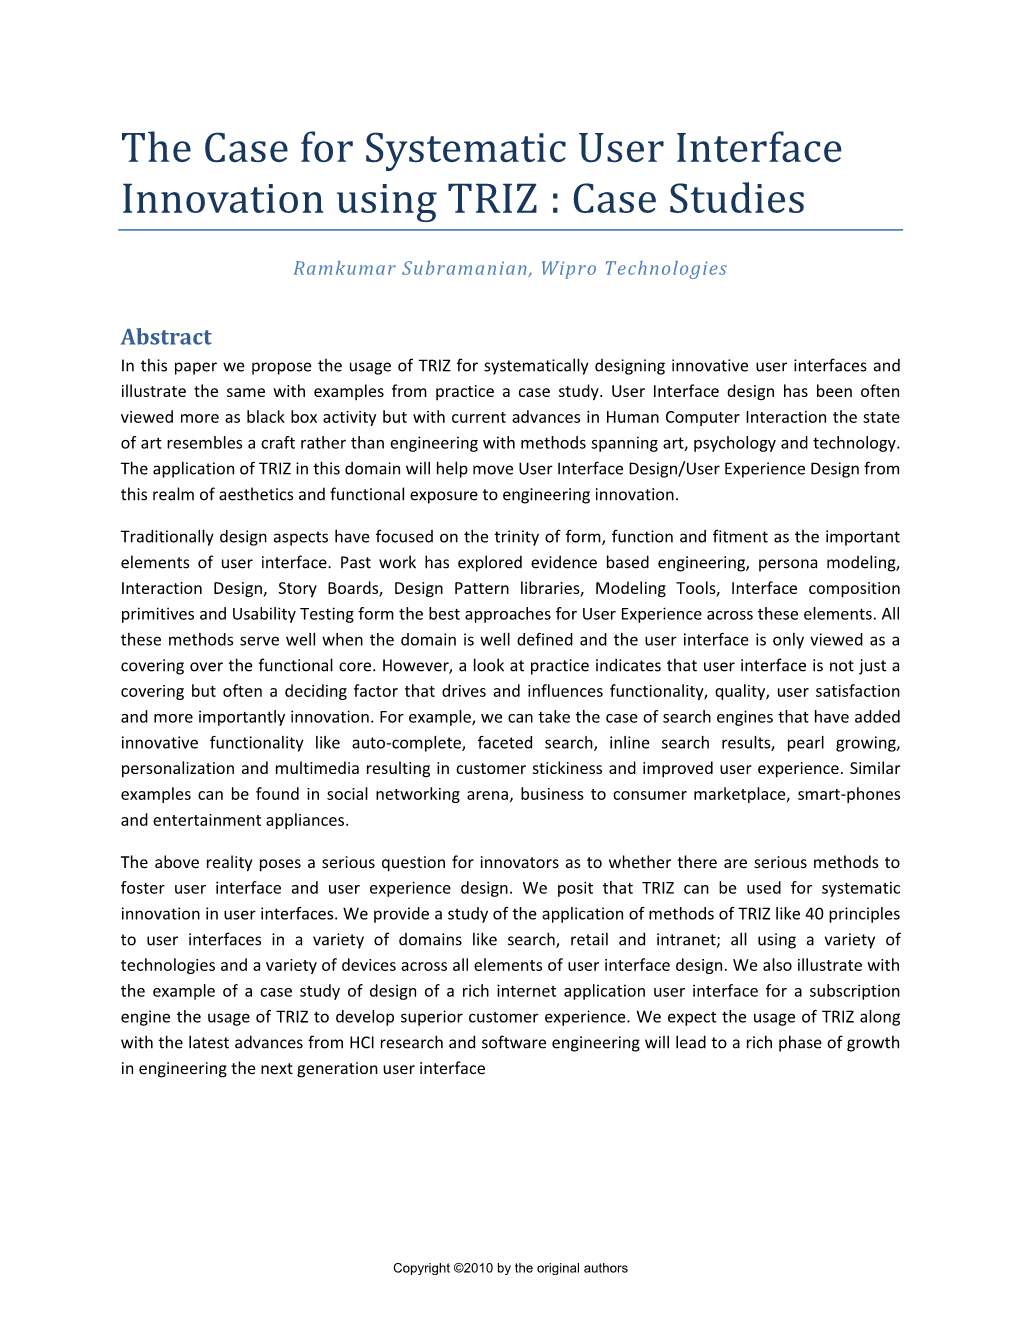 The Case for Systematic User Interface Innovation Using TRIZ : Case Studies